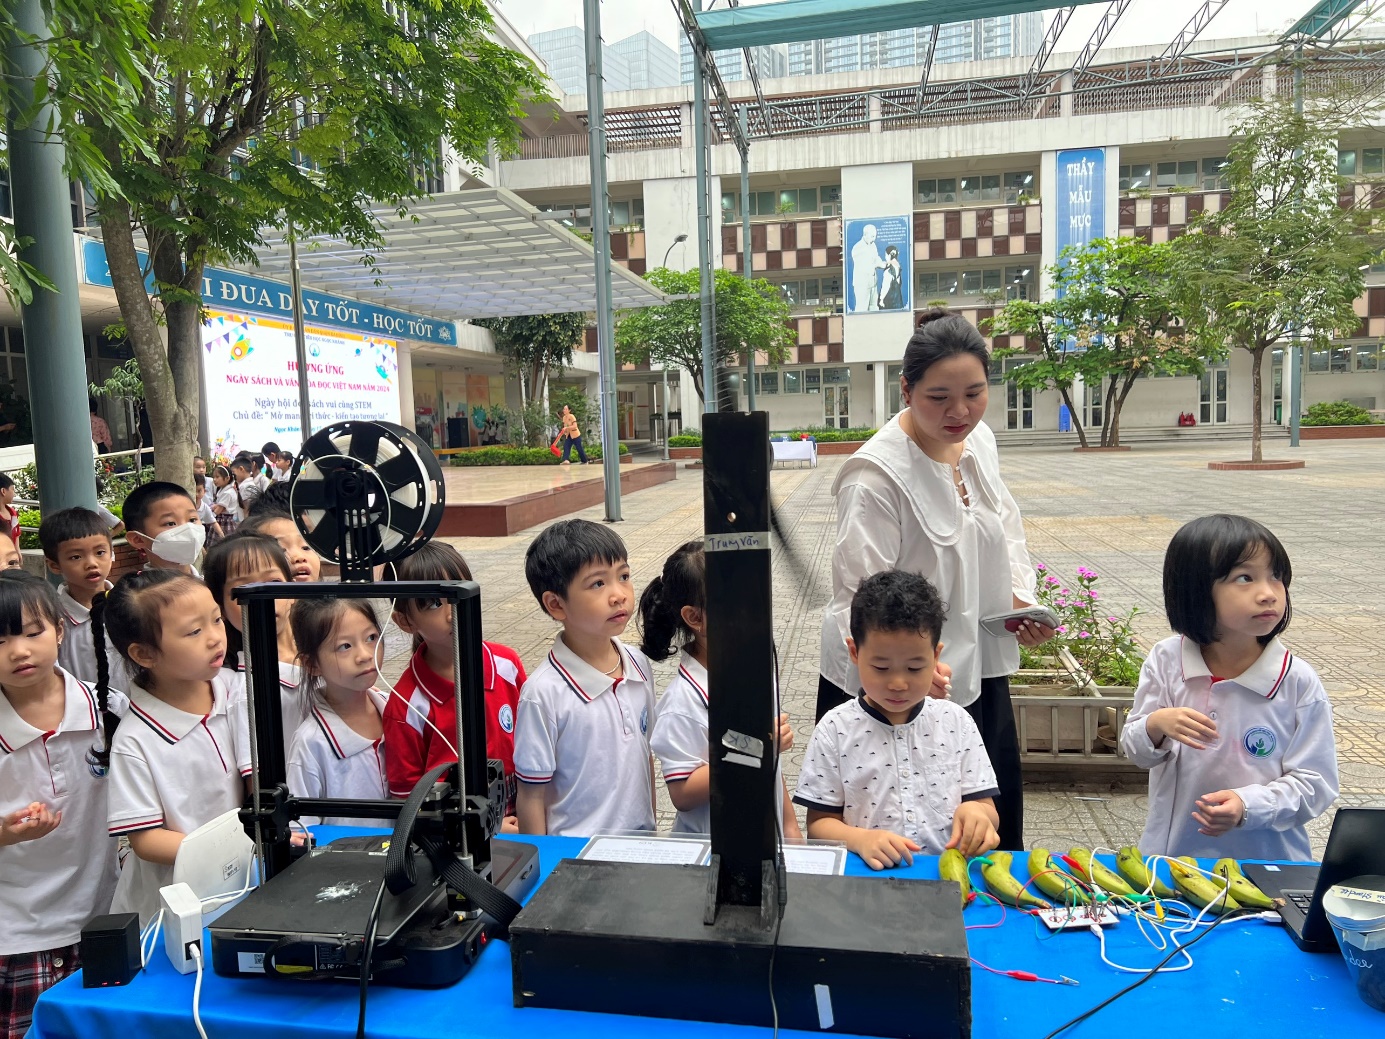 A group of children in front of a table with a machine

Description automatically generated